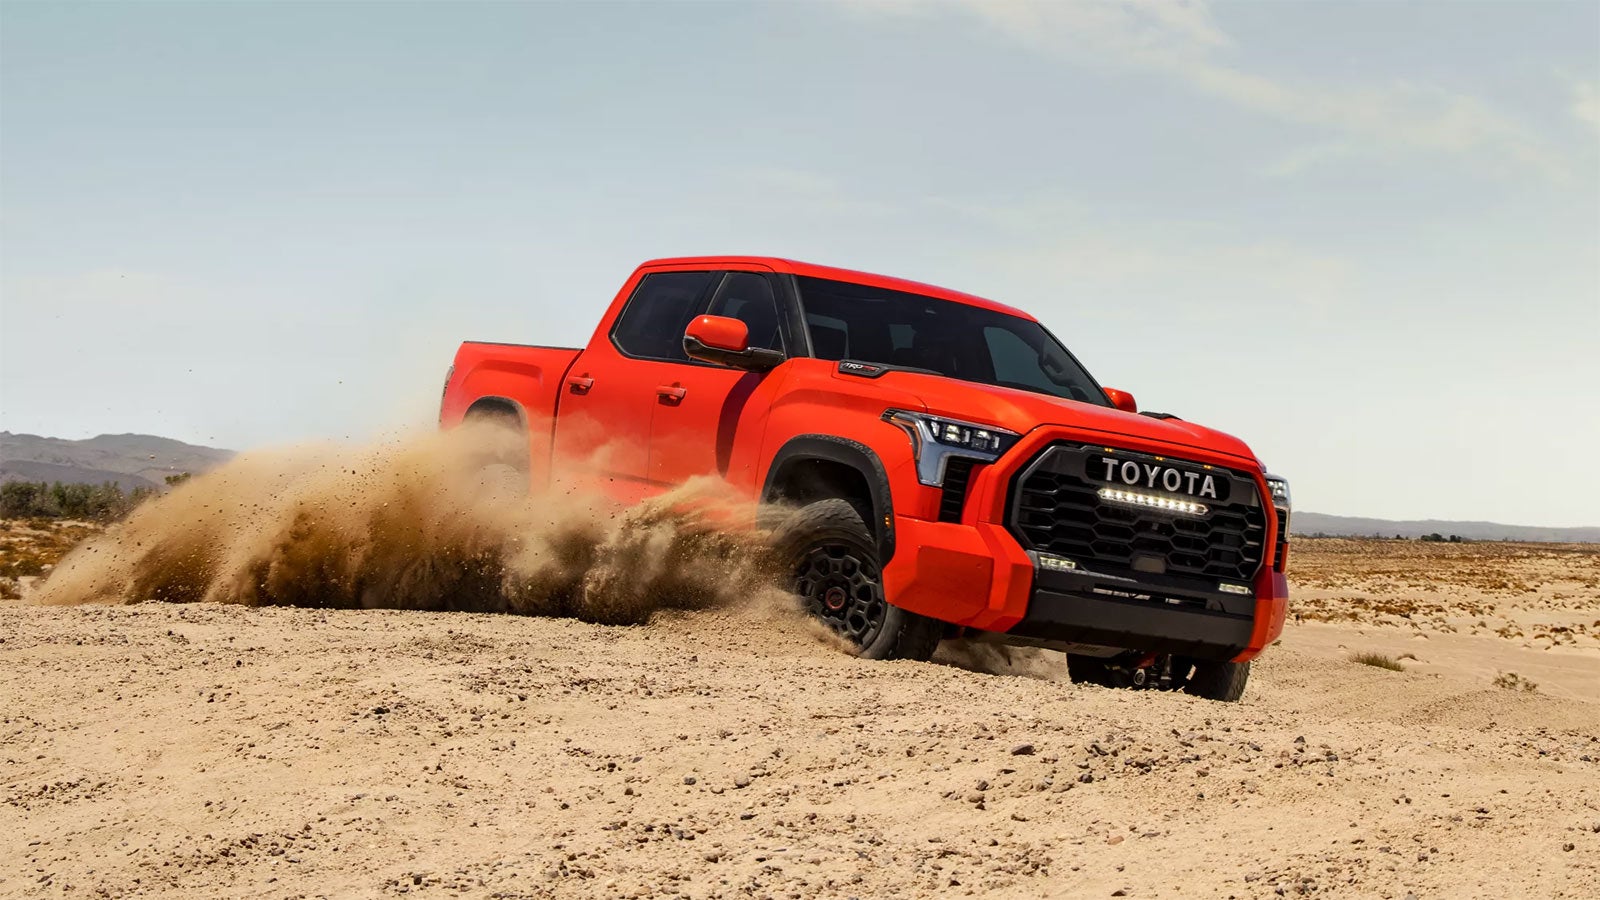 2022 Toyota Tundra Gallery | Seeger Toyota St. Louis in St Louis MO